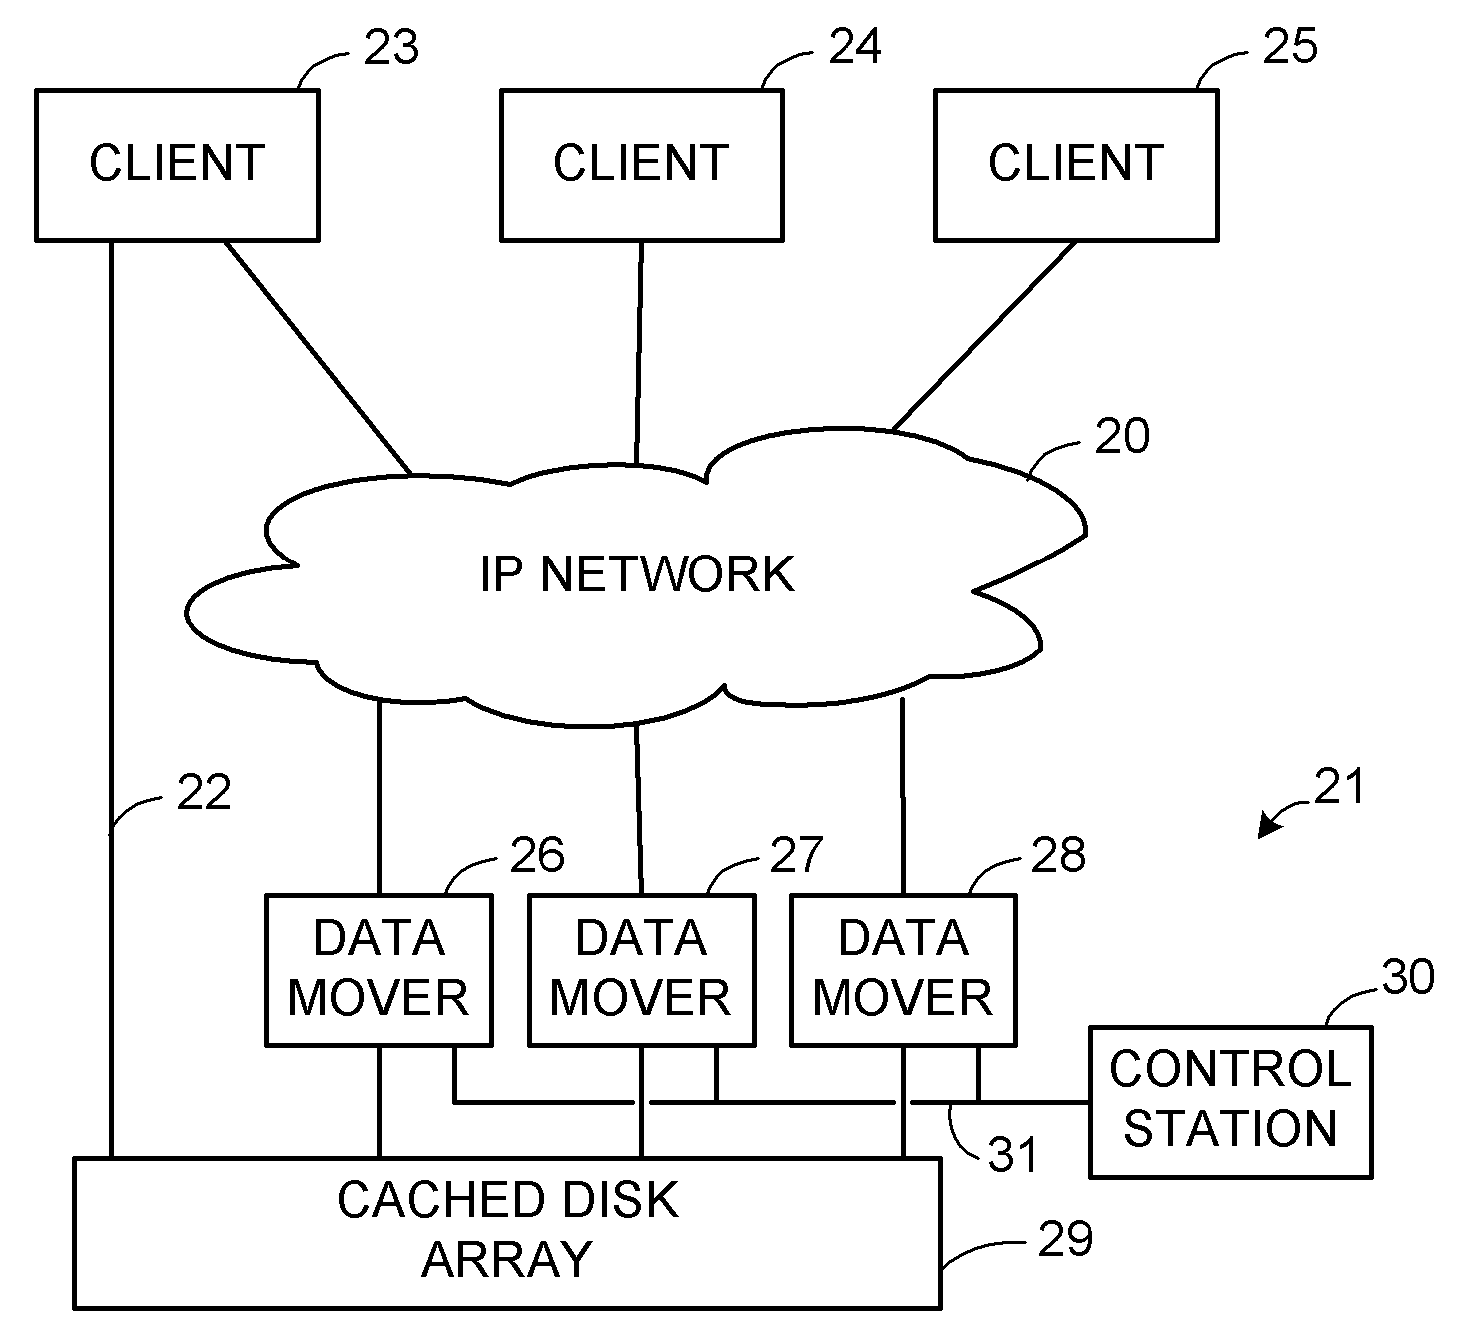 Tiering storage between multiple classes of storage on the same container file system